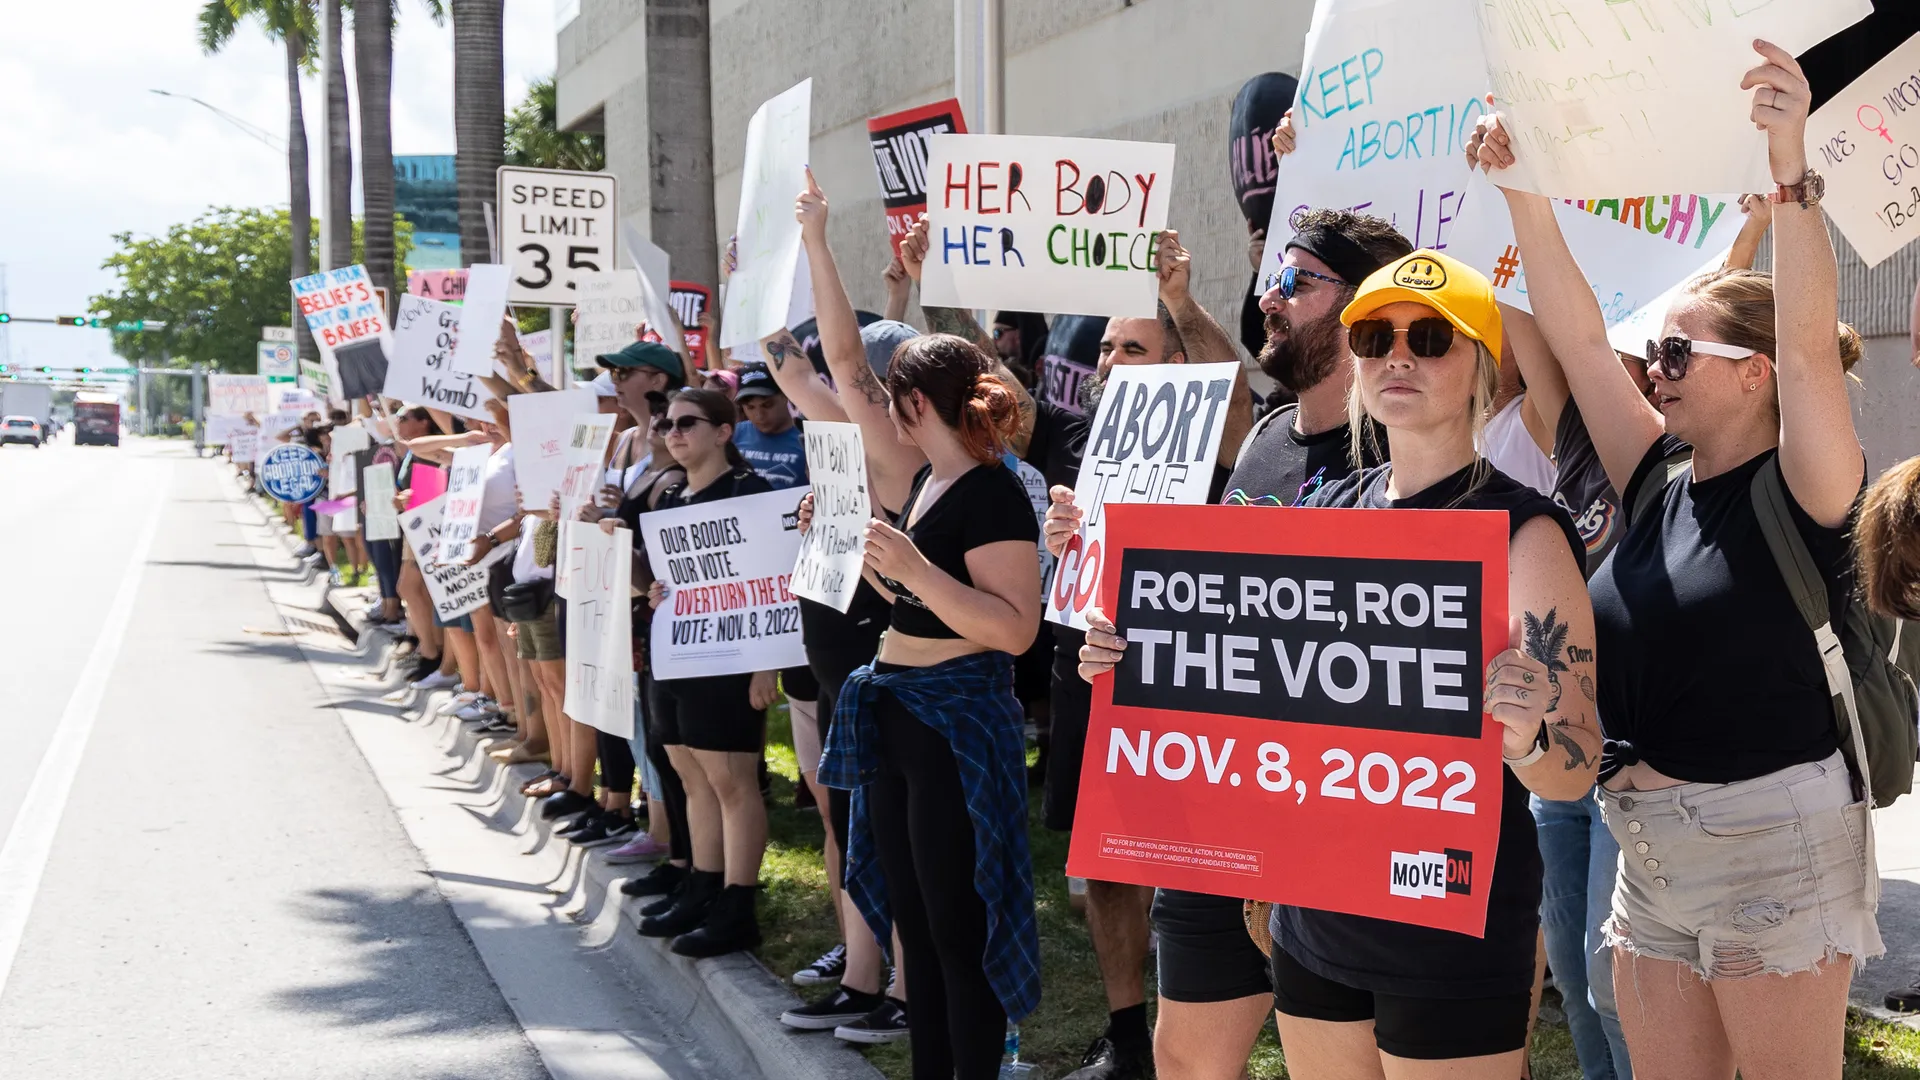 Florida's stringent abortion law prompts concerns over reproductive rights (Credits: Getty Images)